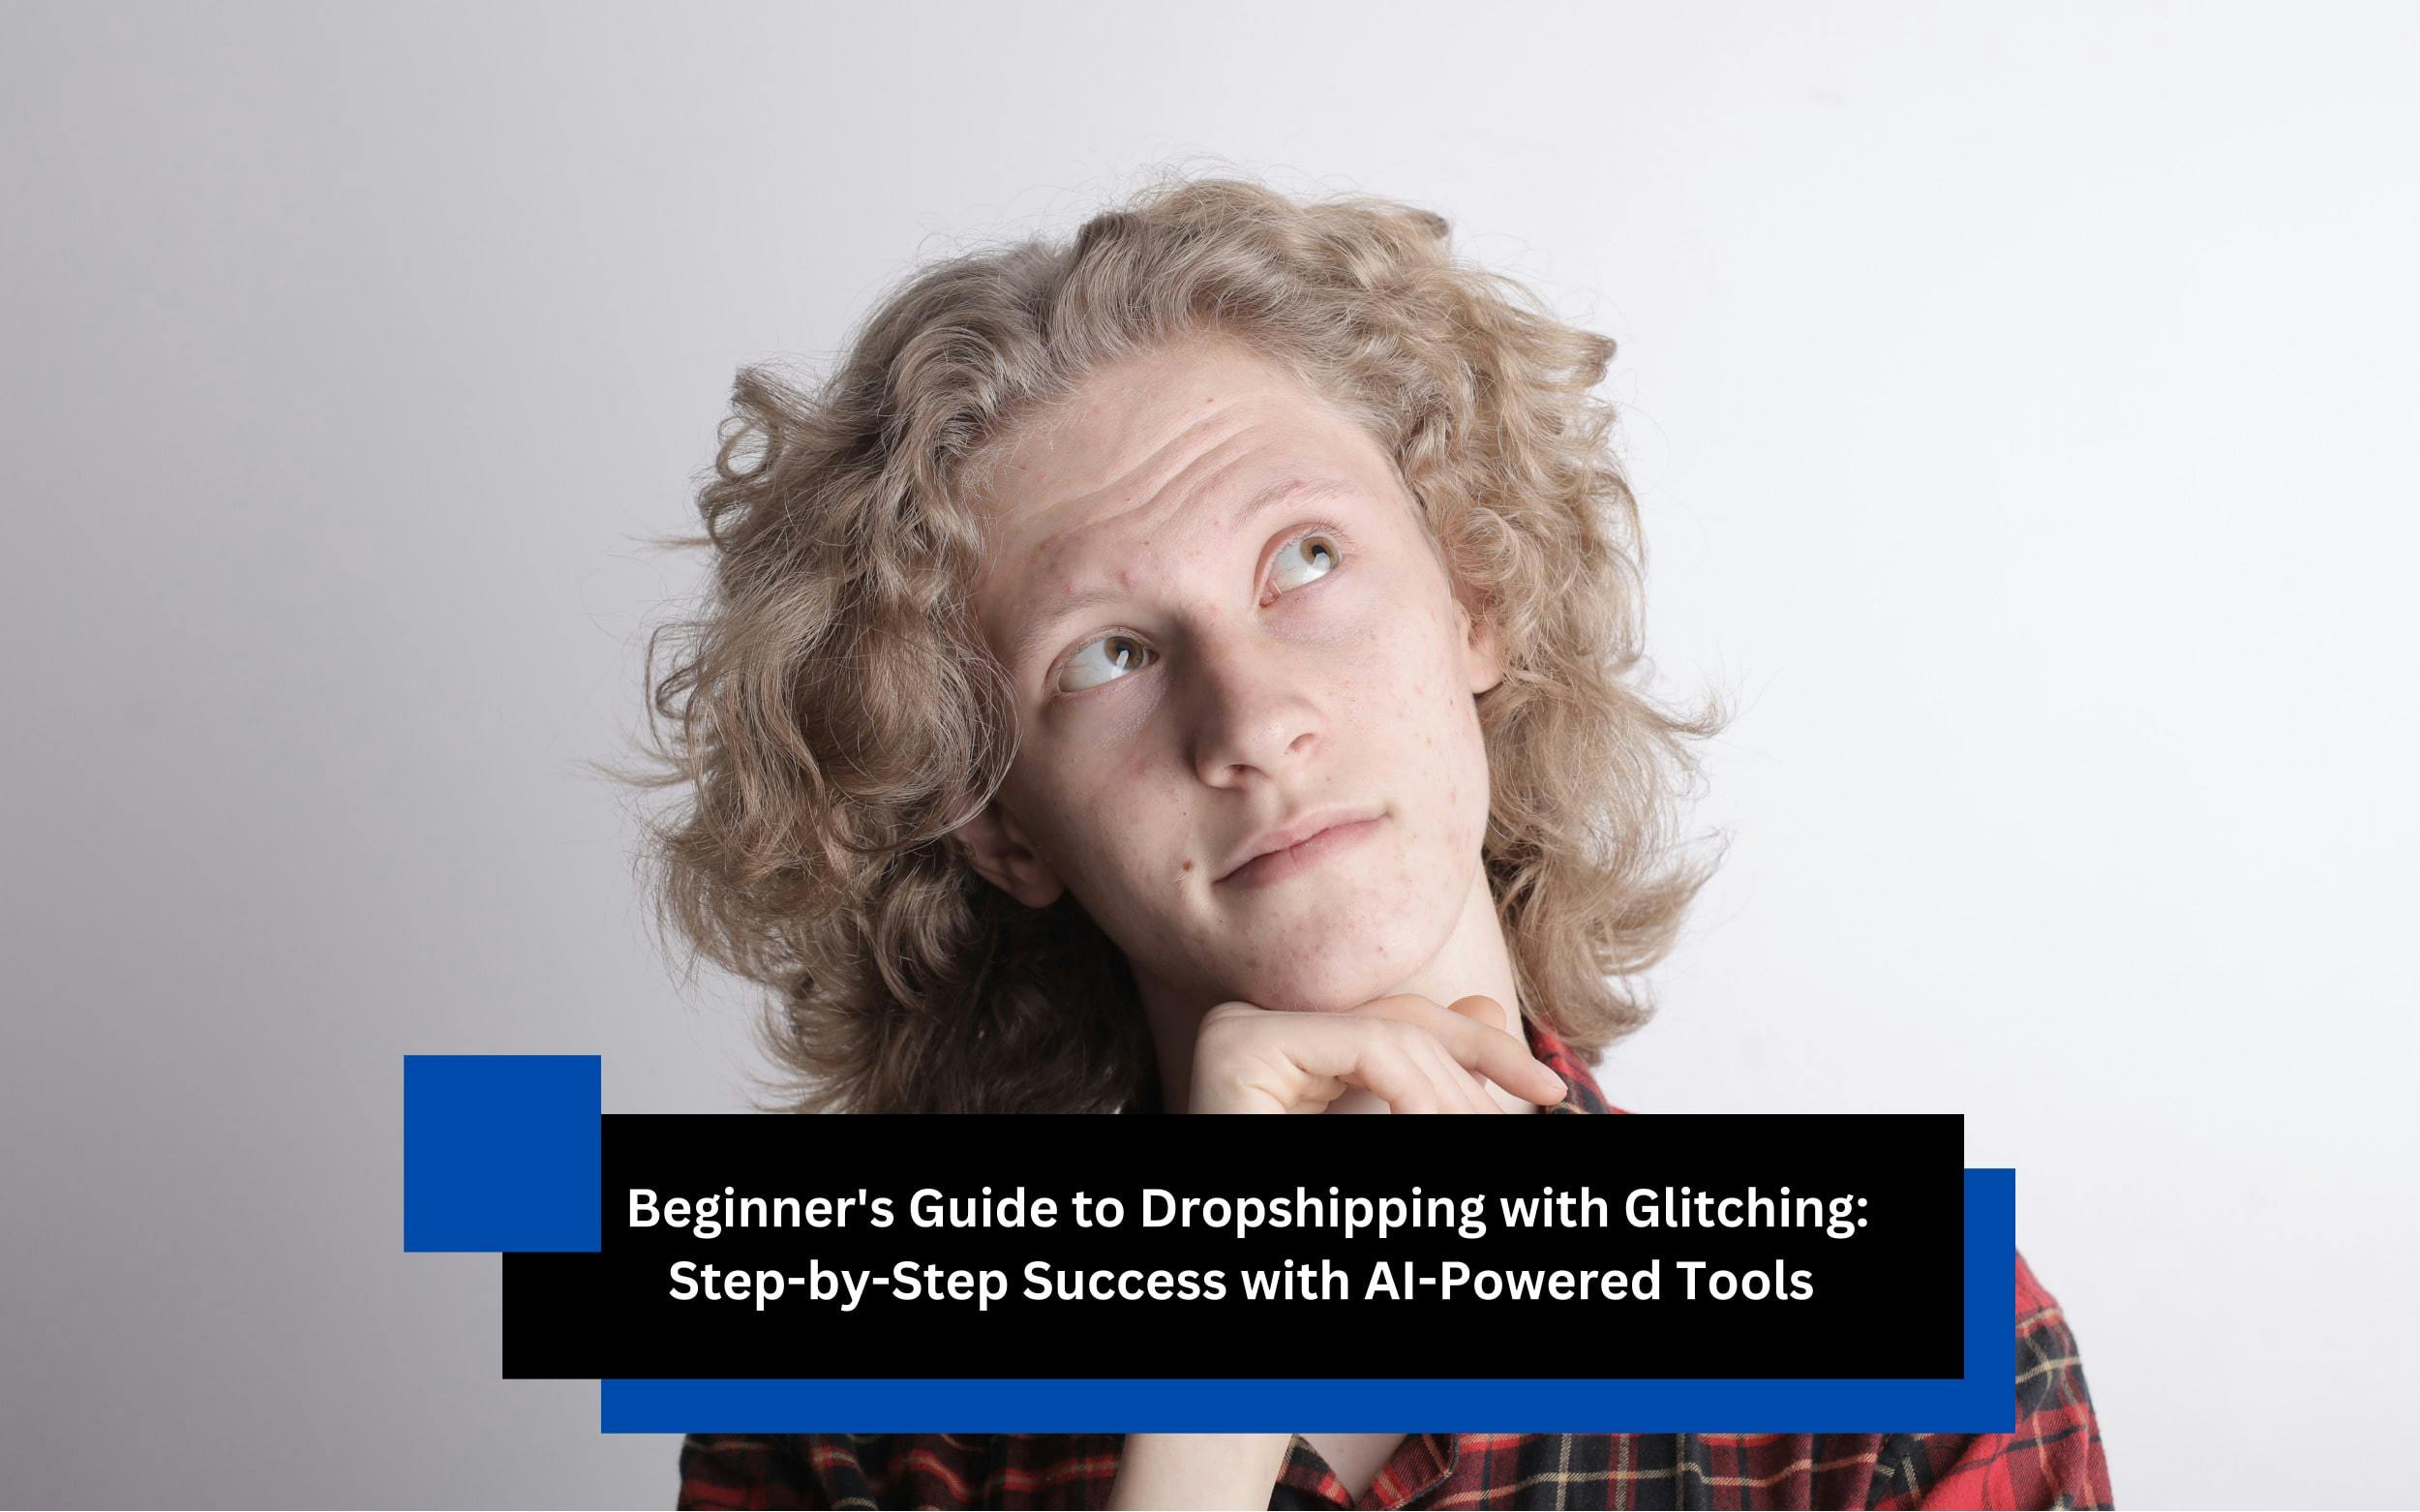 Maximize your dropshipping potential with Glitching breakthrough AI algorithms